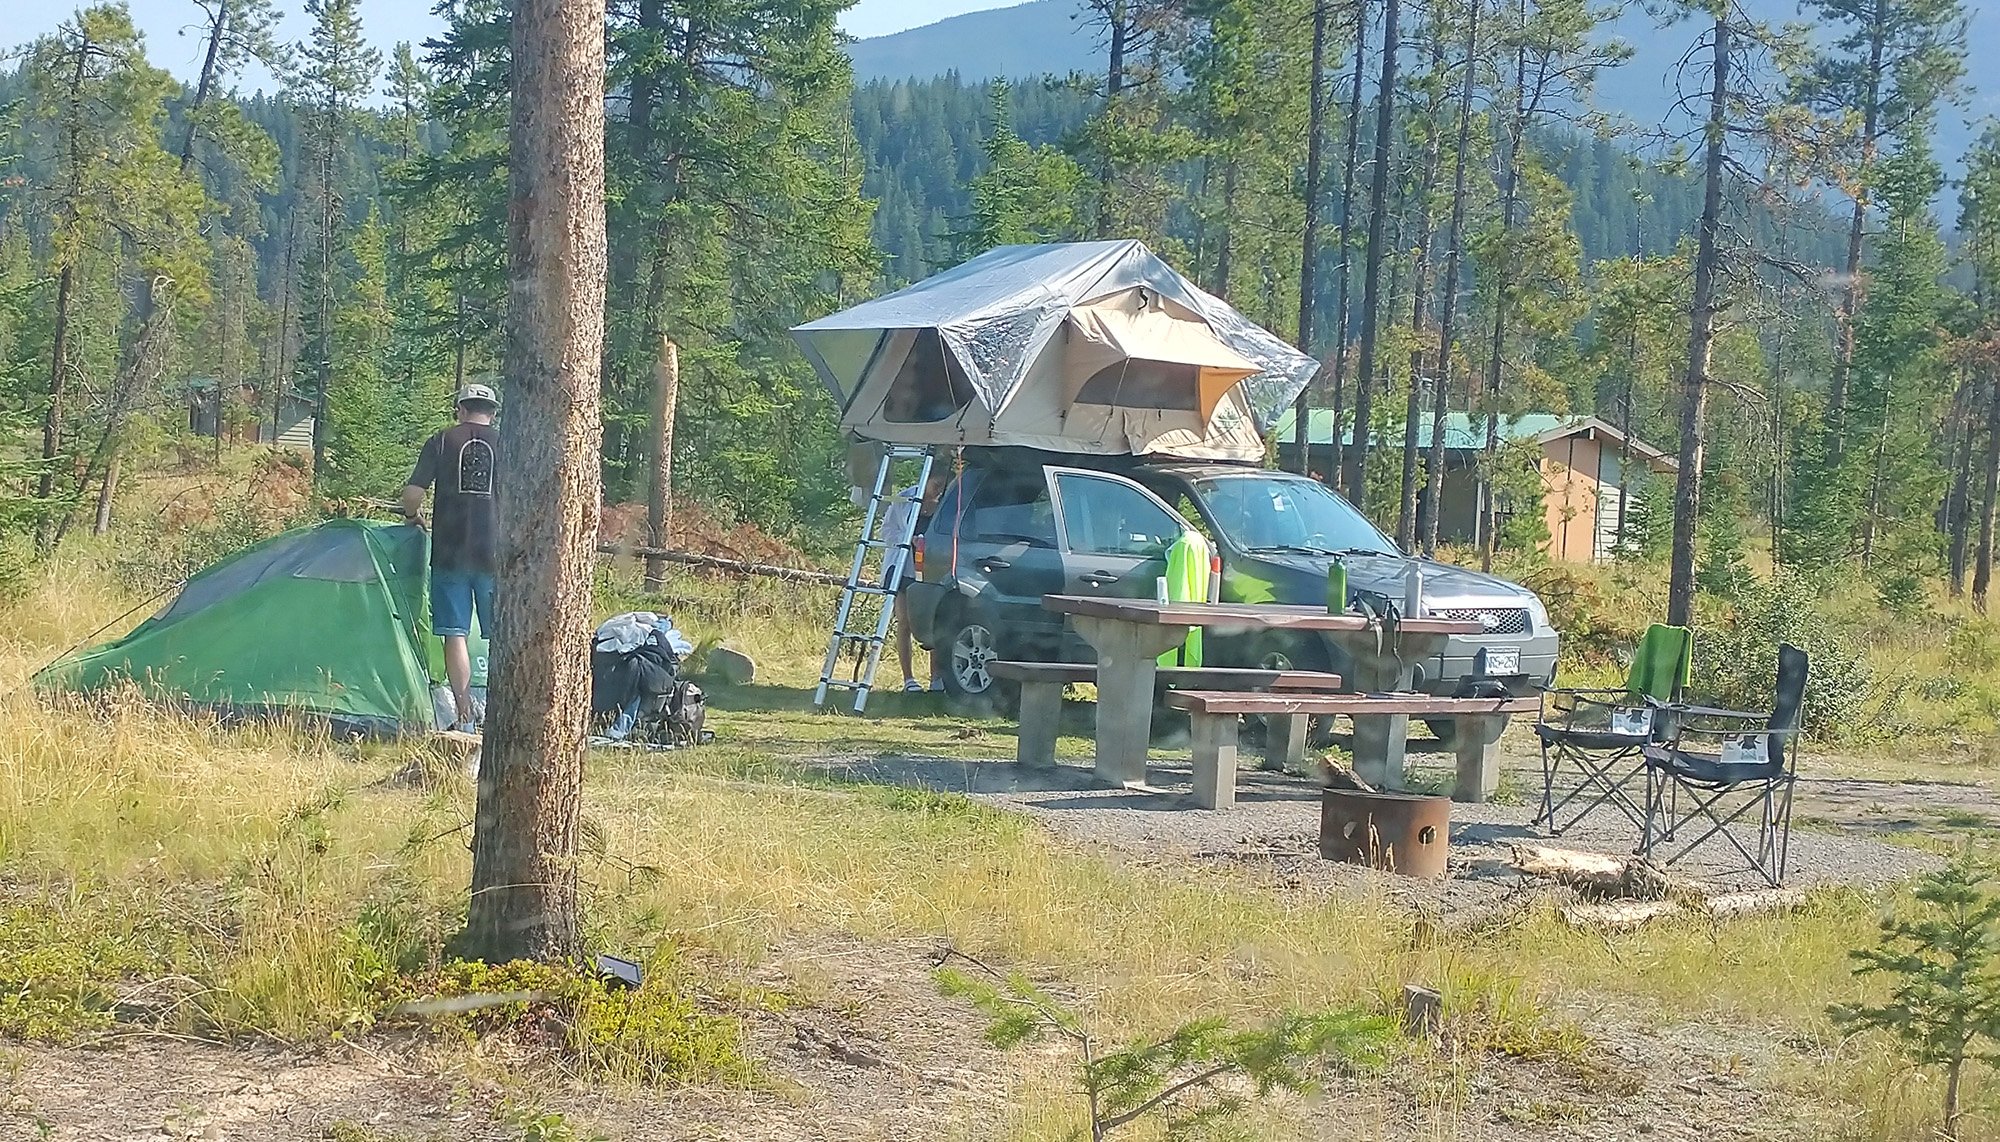 Was treating myself to camping that night. These guys next to me took an hour+ to set this up. Car camping is five minutes. Love it.